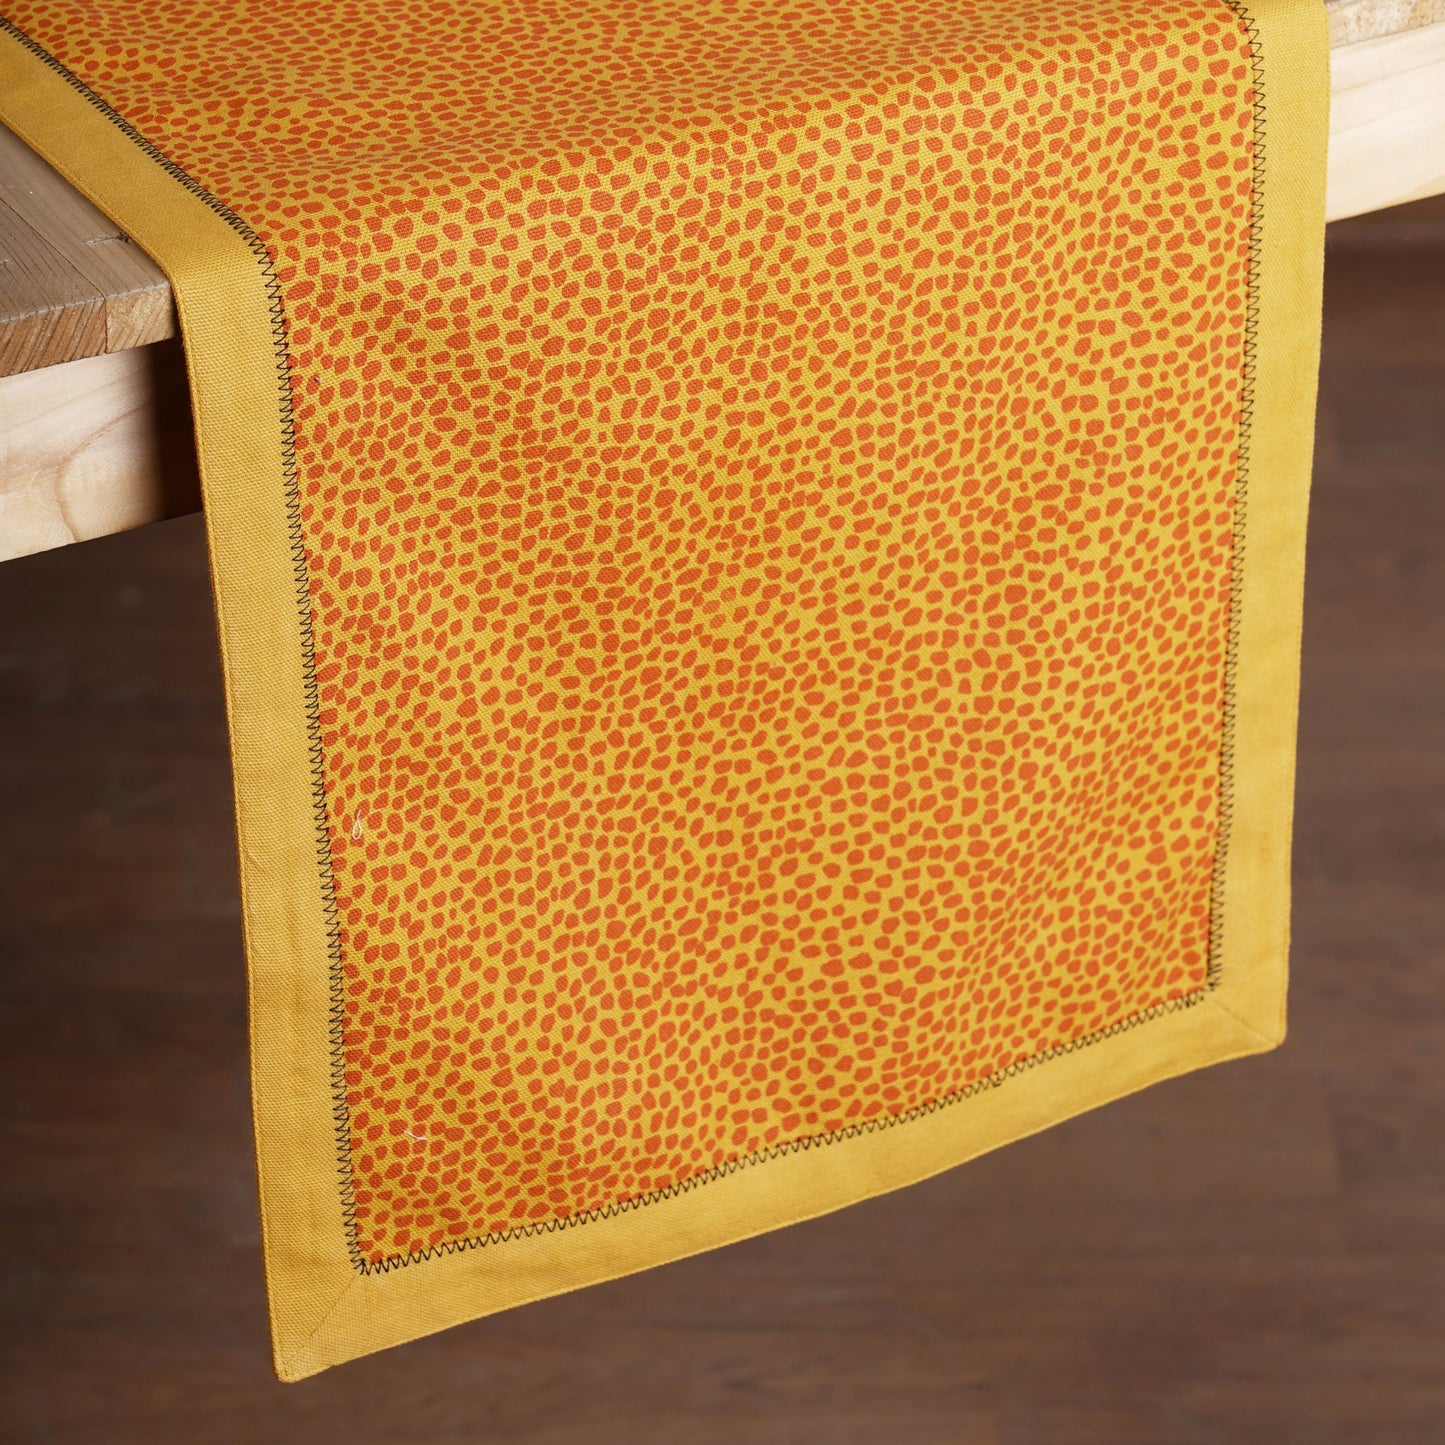 MODERN RETRO - Mustard yellow cotton Table runner, dot print with border and embroidery, sizes available